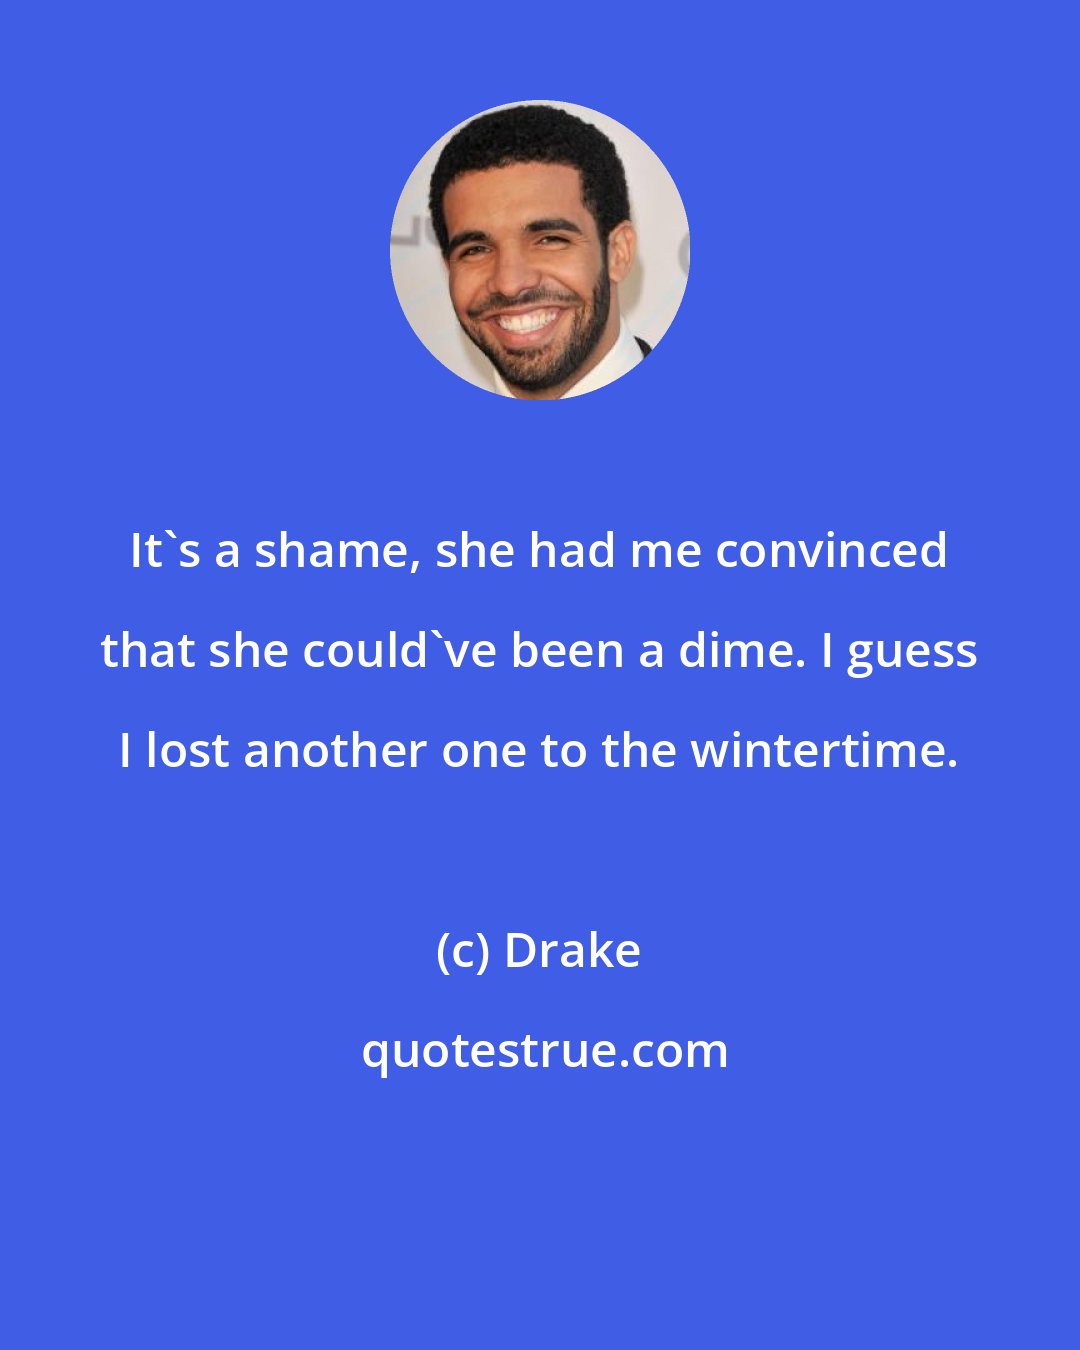 Drake: It's a shame, she had me convinced that she could've been a dime. I guess I lost another one to the wintertime.